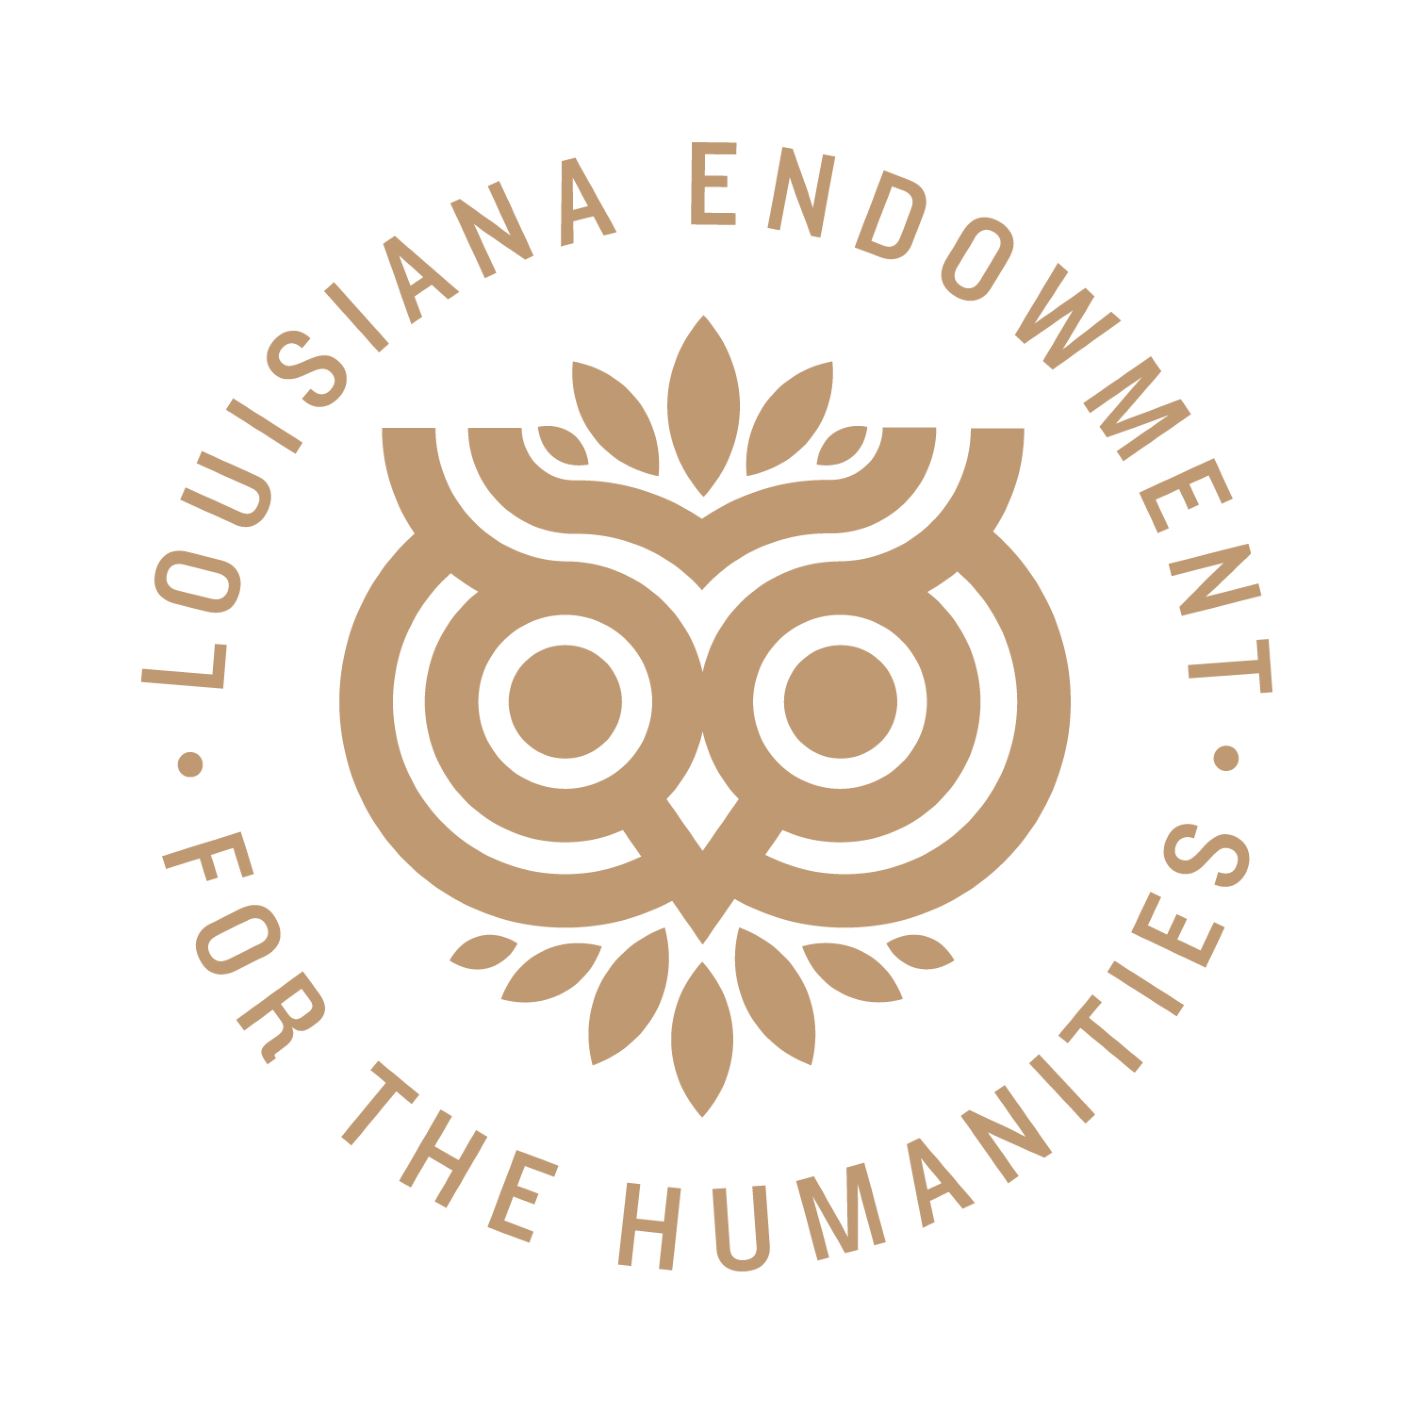 Louisiana Endowment for the Humanities